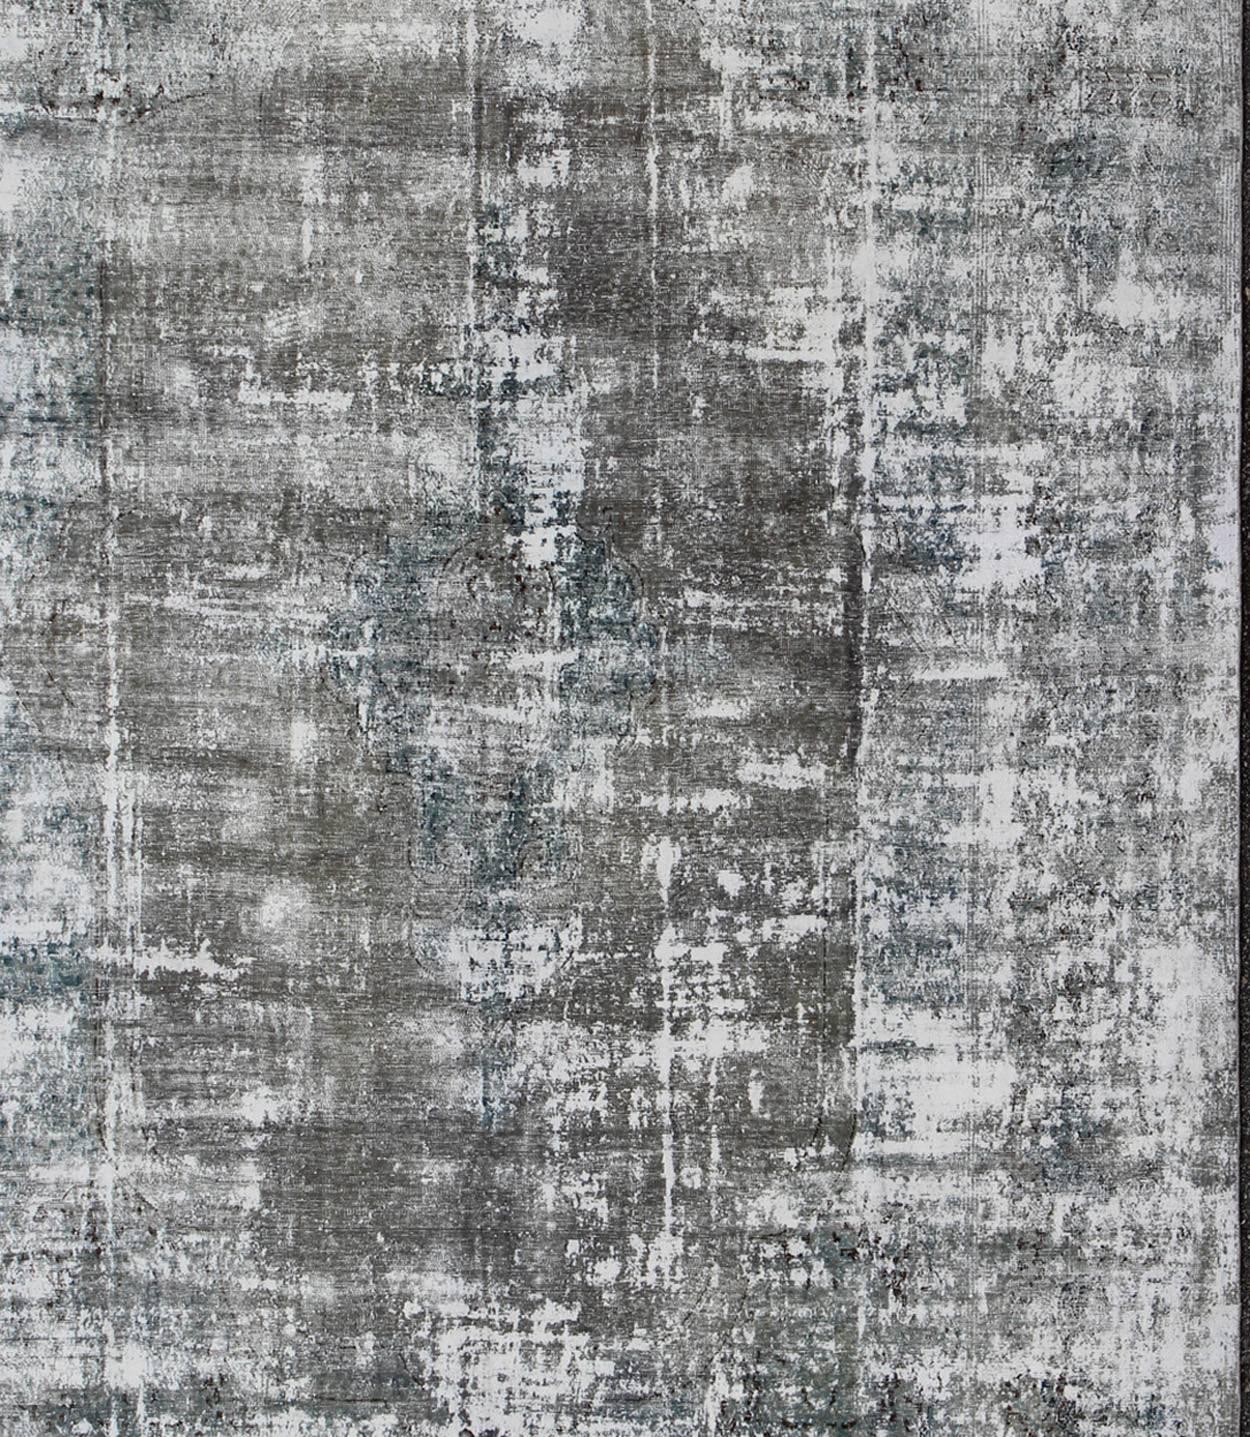 Distressed Vintage Persian Rug with Abstract Modern Design in Shades of Warm Gray, Silver, and Blue colors.
Measures: 9'9 x 14'7
Distressed vintage Persian large abstract Rug with Modern Design/ abstract design in Silver, Warm Gray, and Blue & White